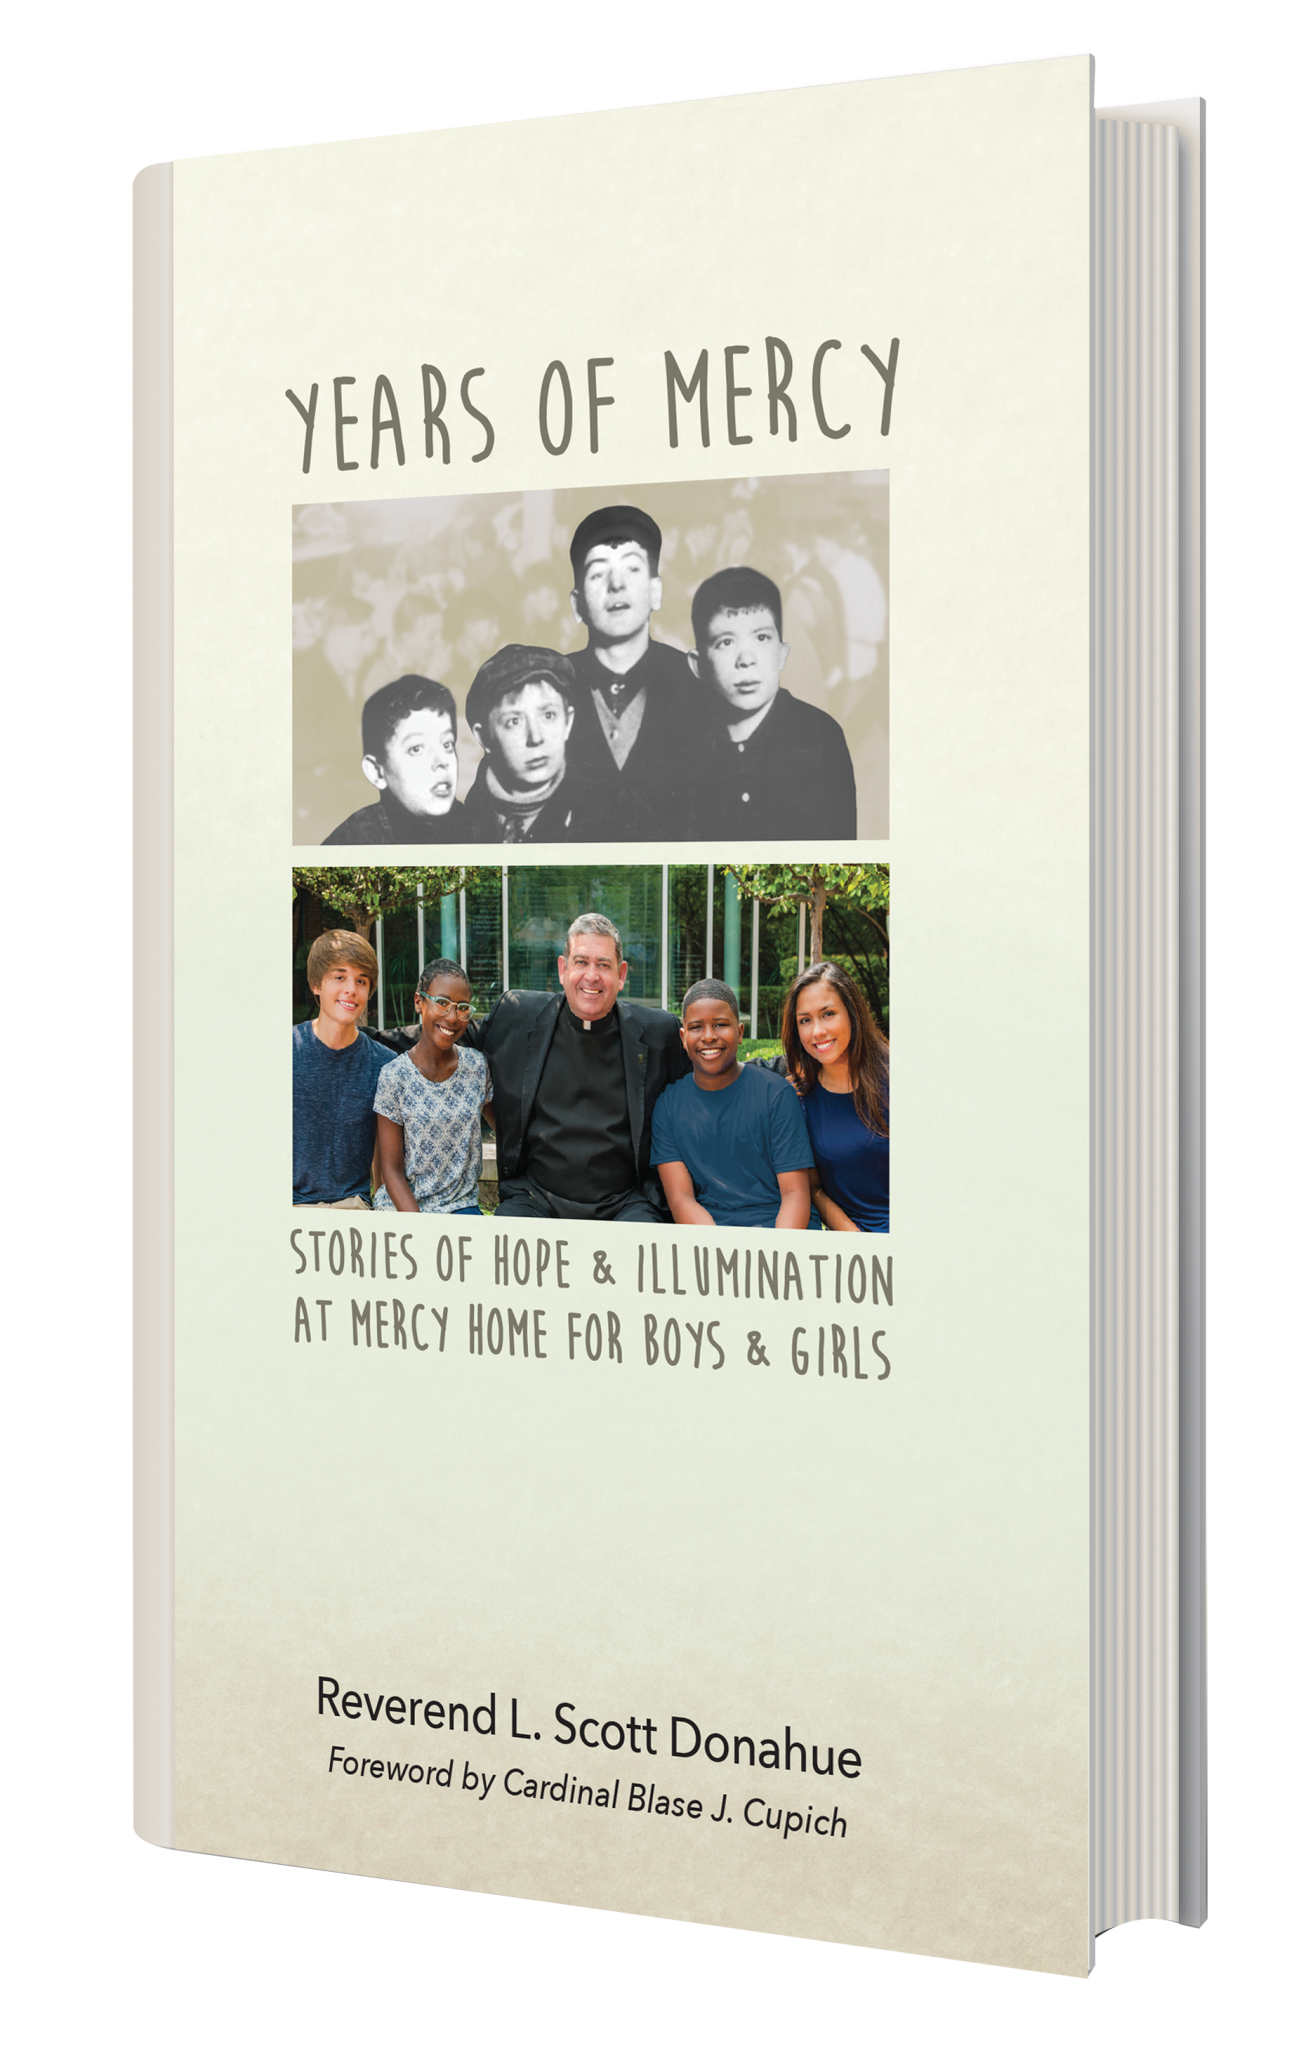 Our History - Mercy Home for Boys & Girls